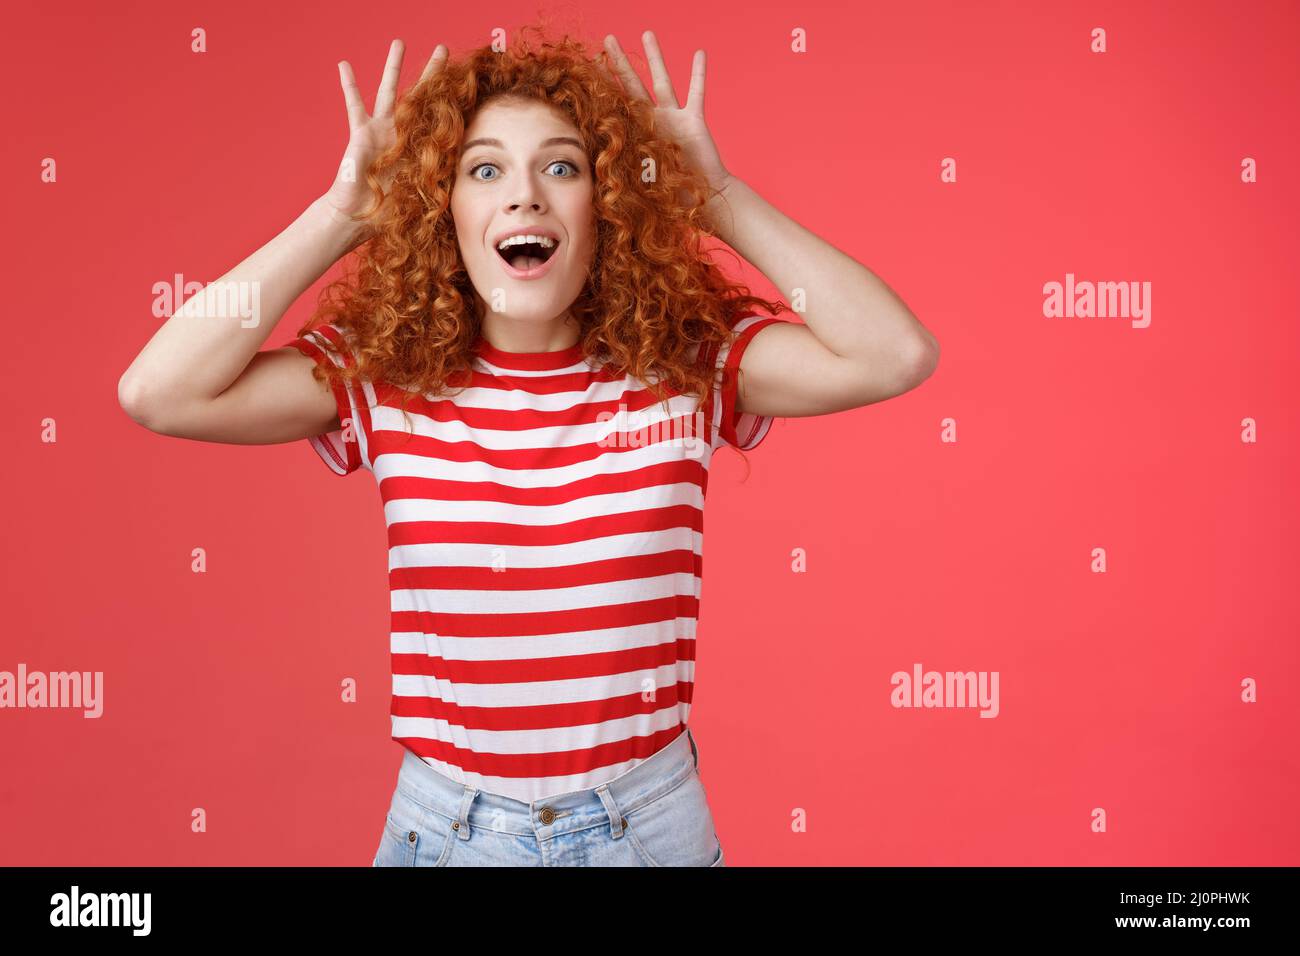 Impressed excited shocked young cute redhead curly-haired ginger girlfriend reacting amazed surprised awesome gift cannot believ Stock Photo